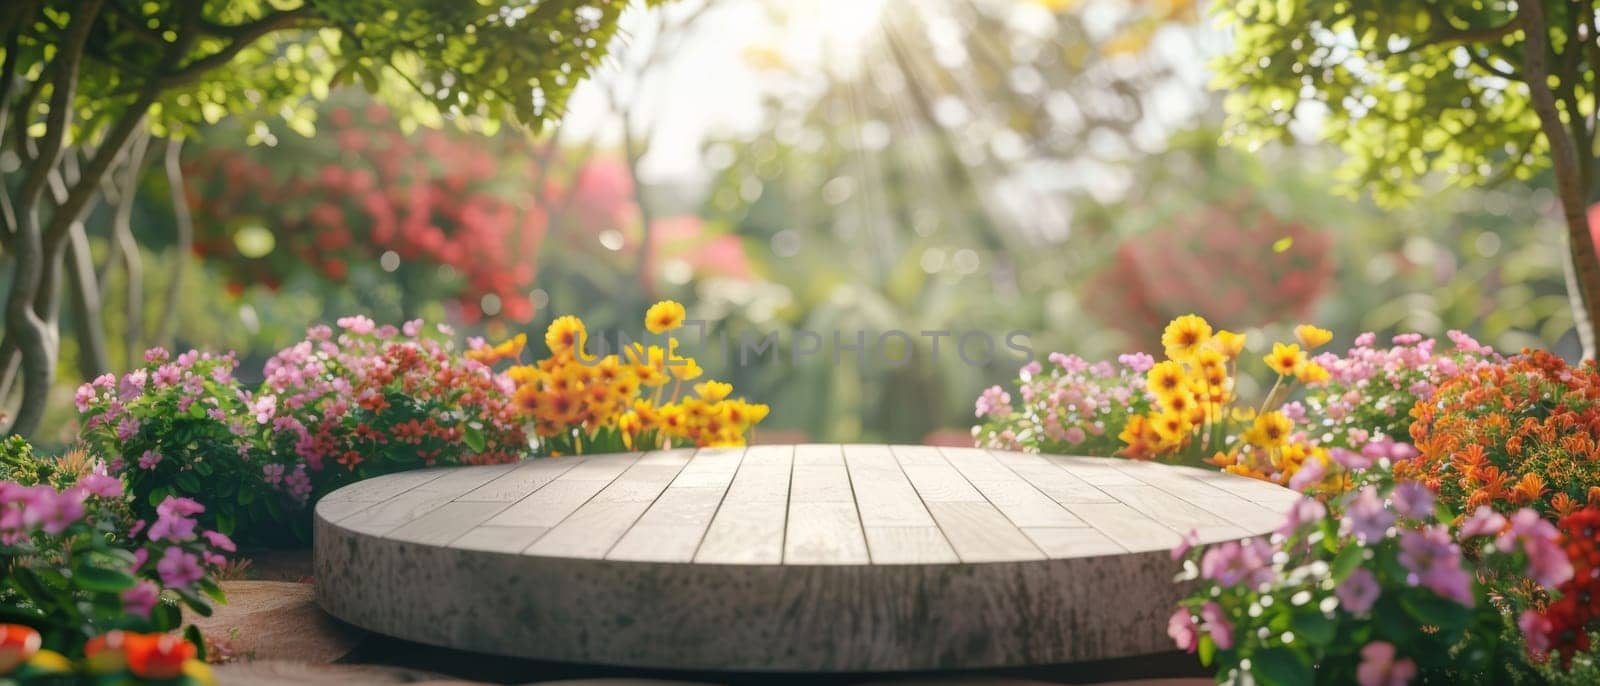 A tranquil garden setting with a wooden podium framed by an array of colorful blooms in soft sunlight